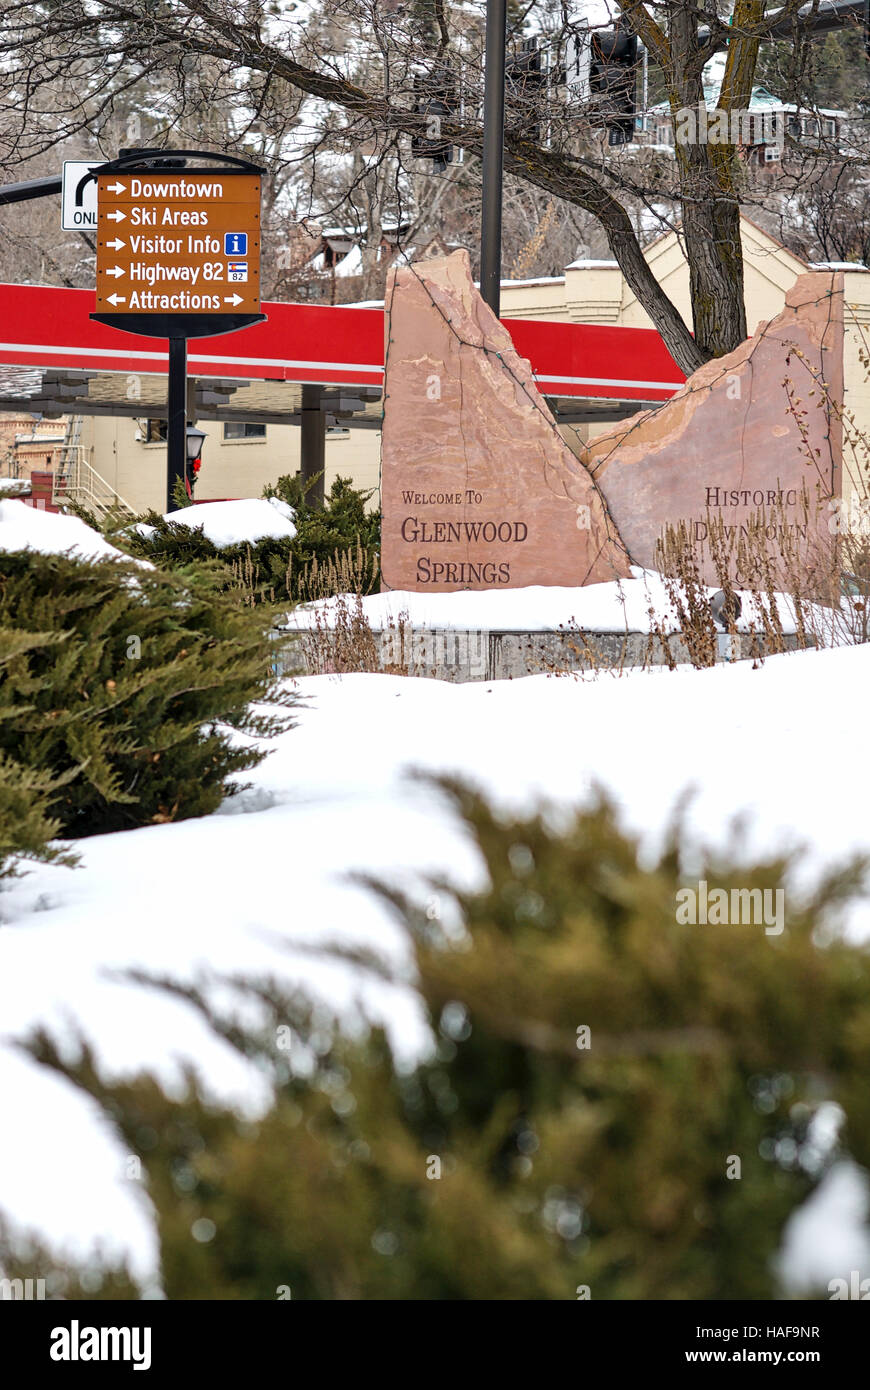 A 'Welcome to Glenwood Springs' rock sign welcomes visitors to Glenwood Springs, Colorado, in a city park. Stock Photo